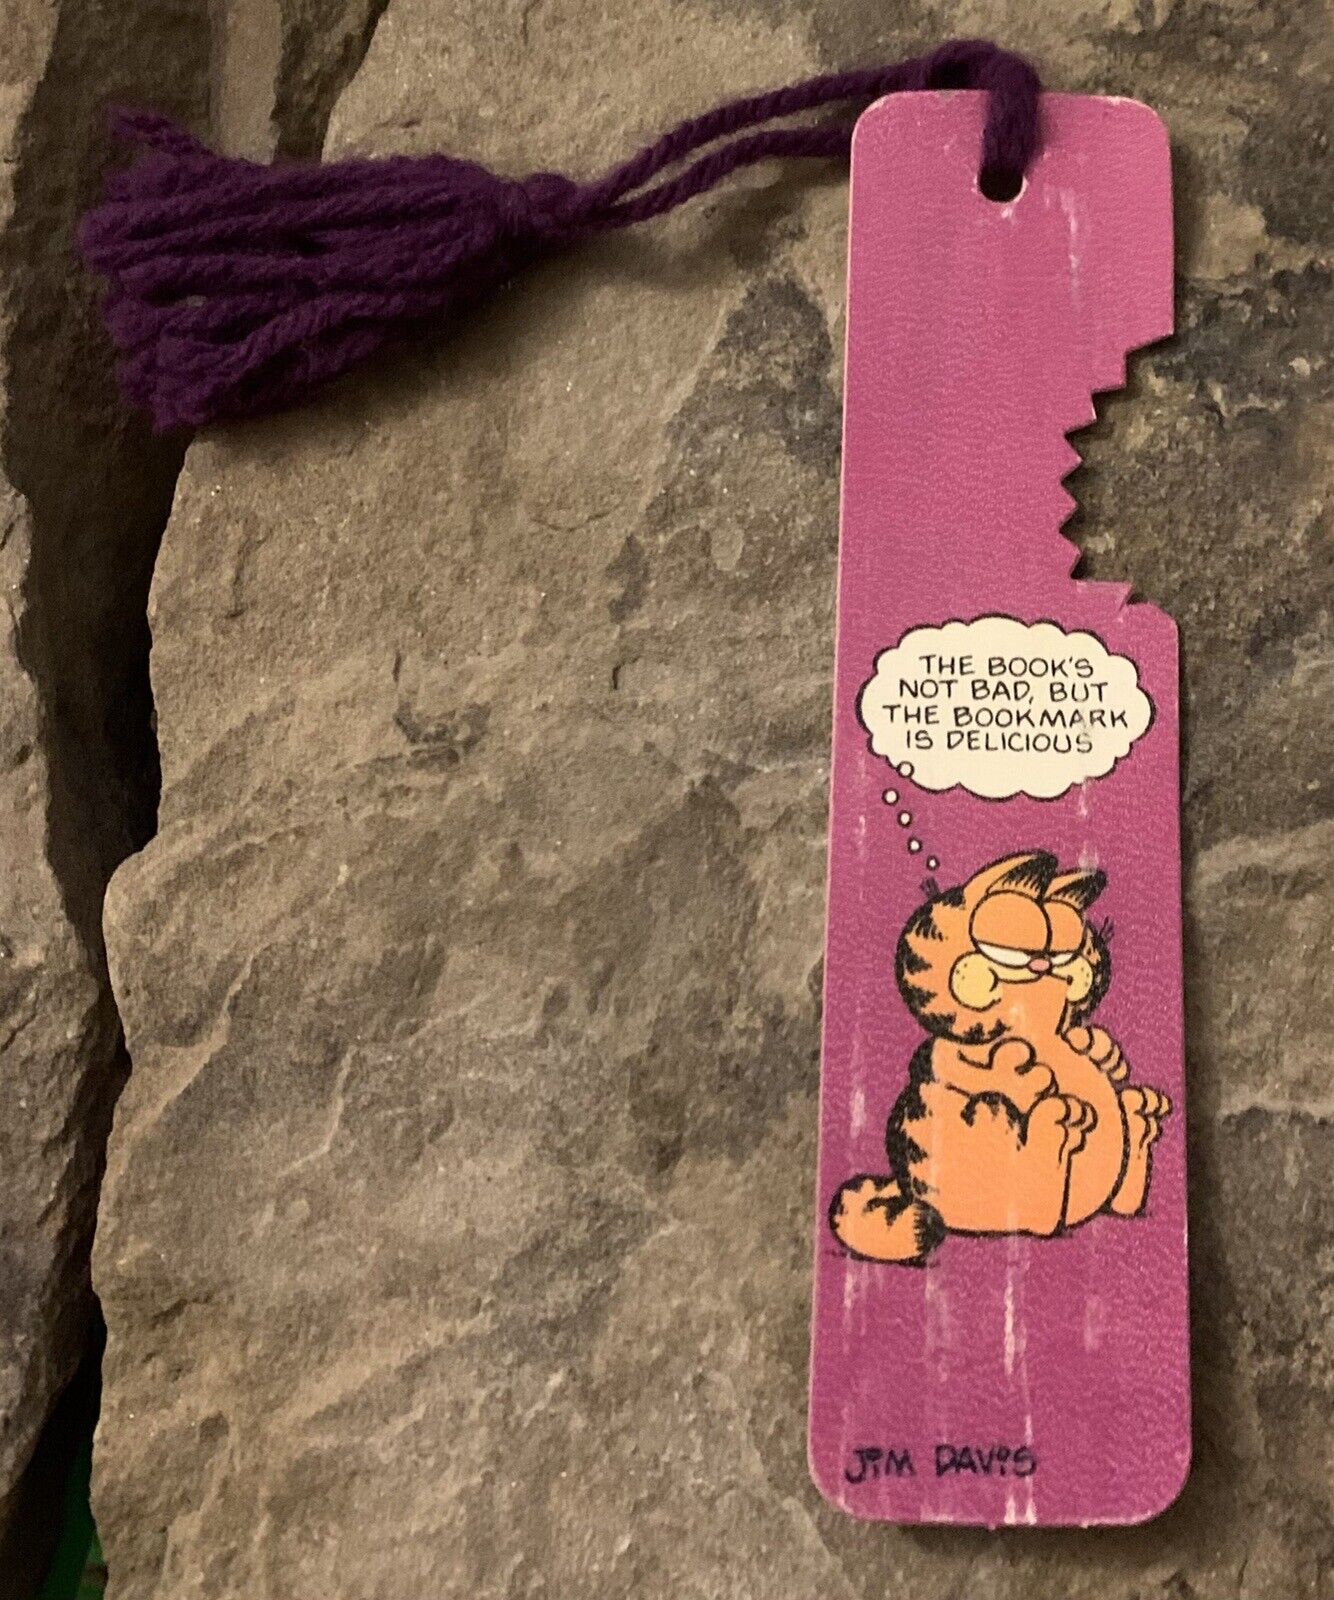 Garfield Vintage Book Mark. The Book’s Not Bad, But The Bookmark Is Delicious